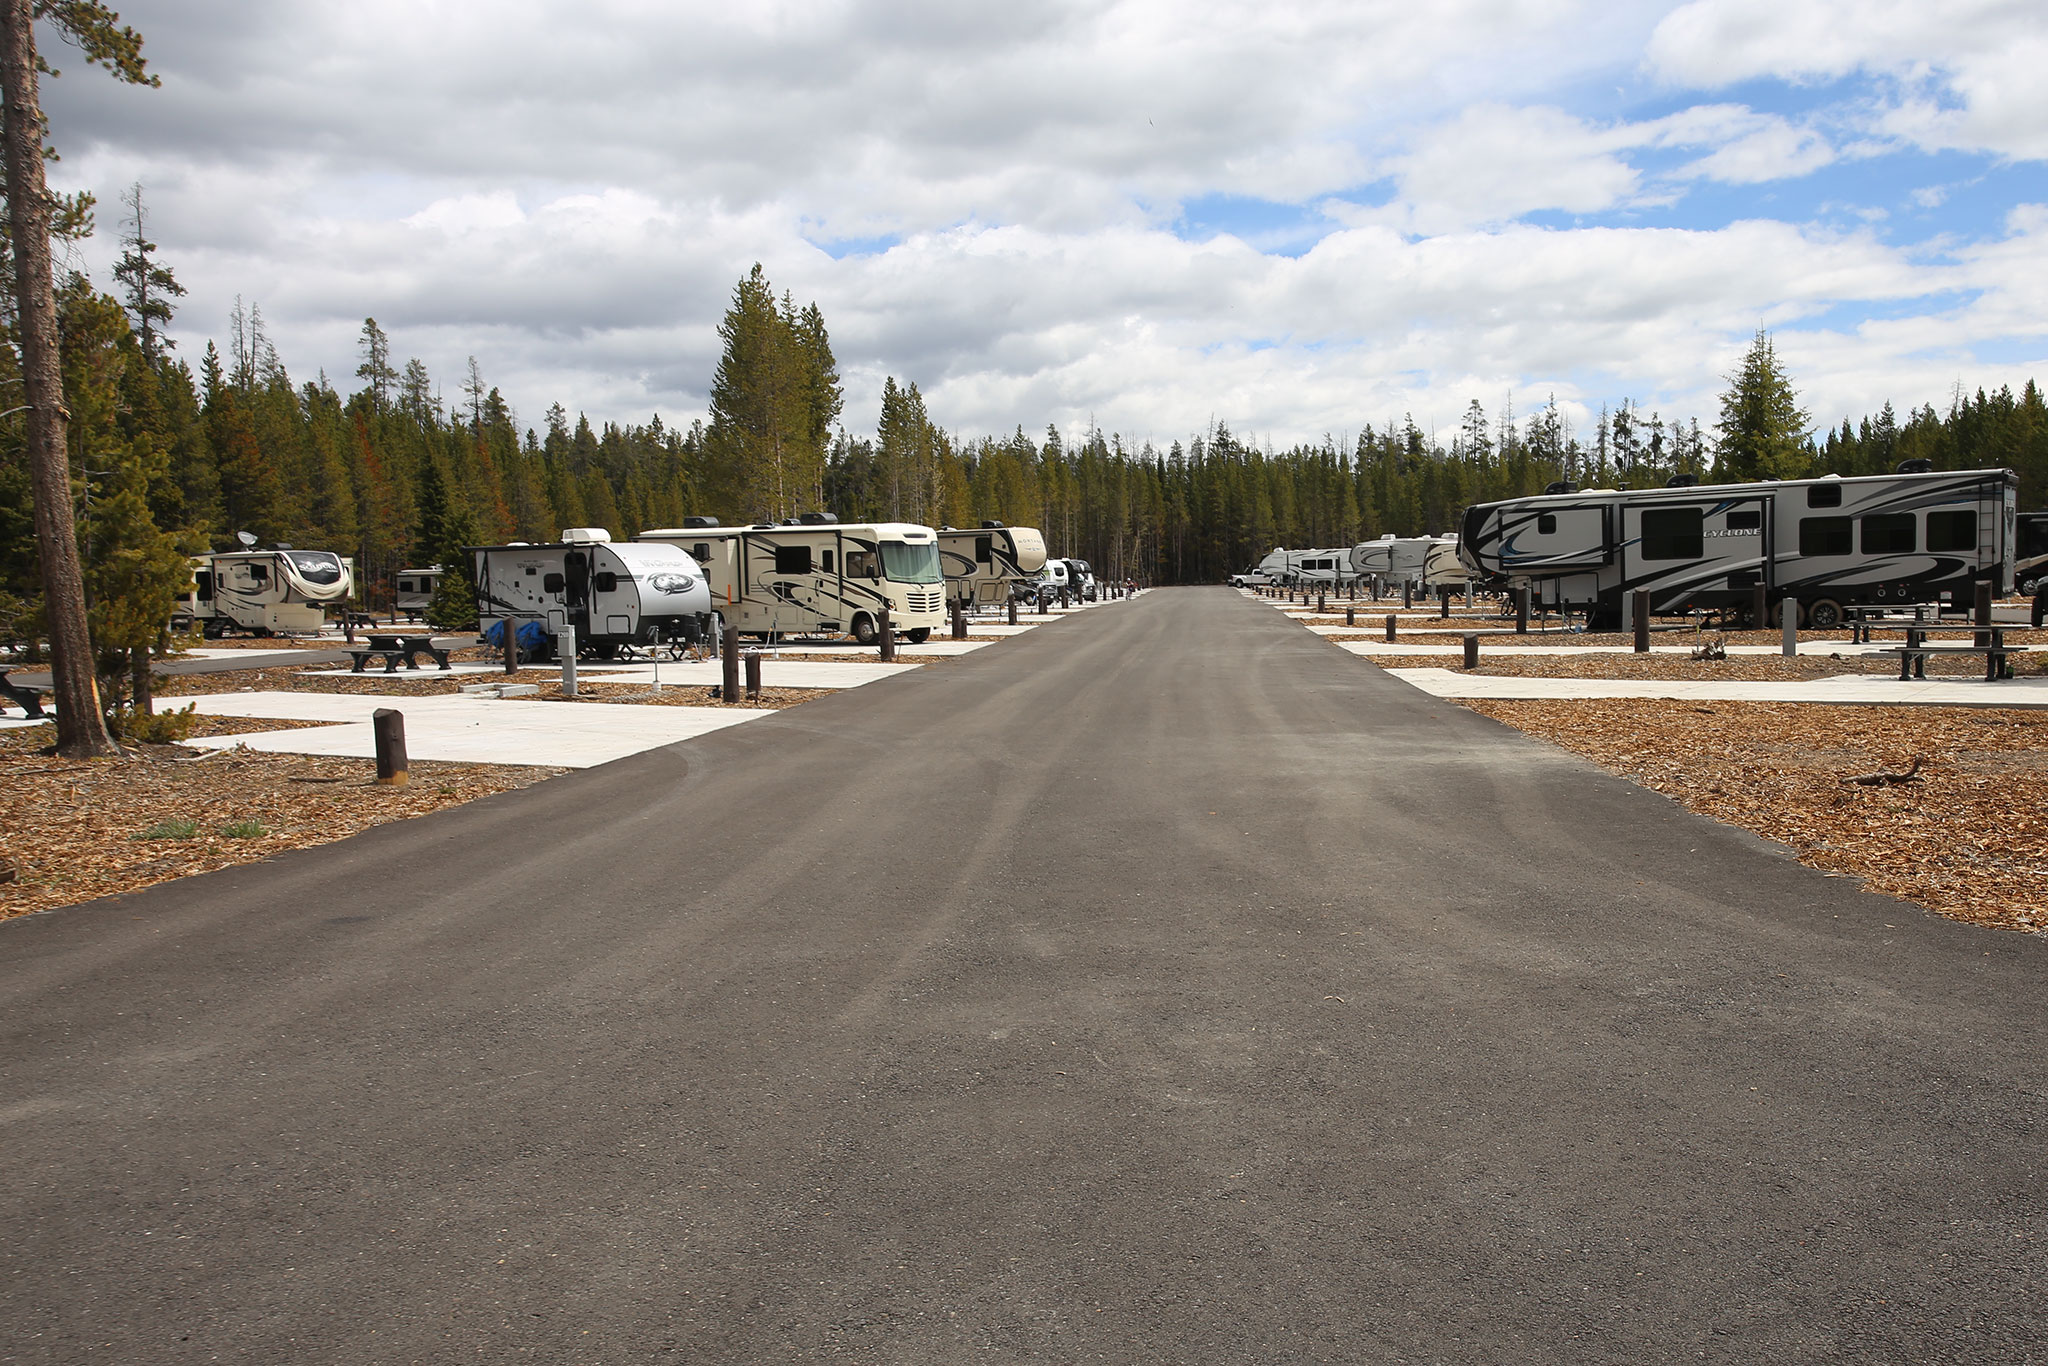 RVing in Yellowstone National Park Revs Up